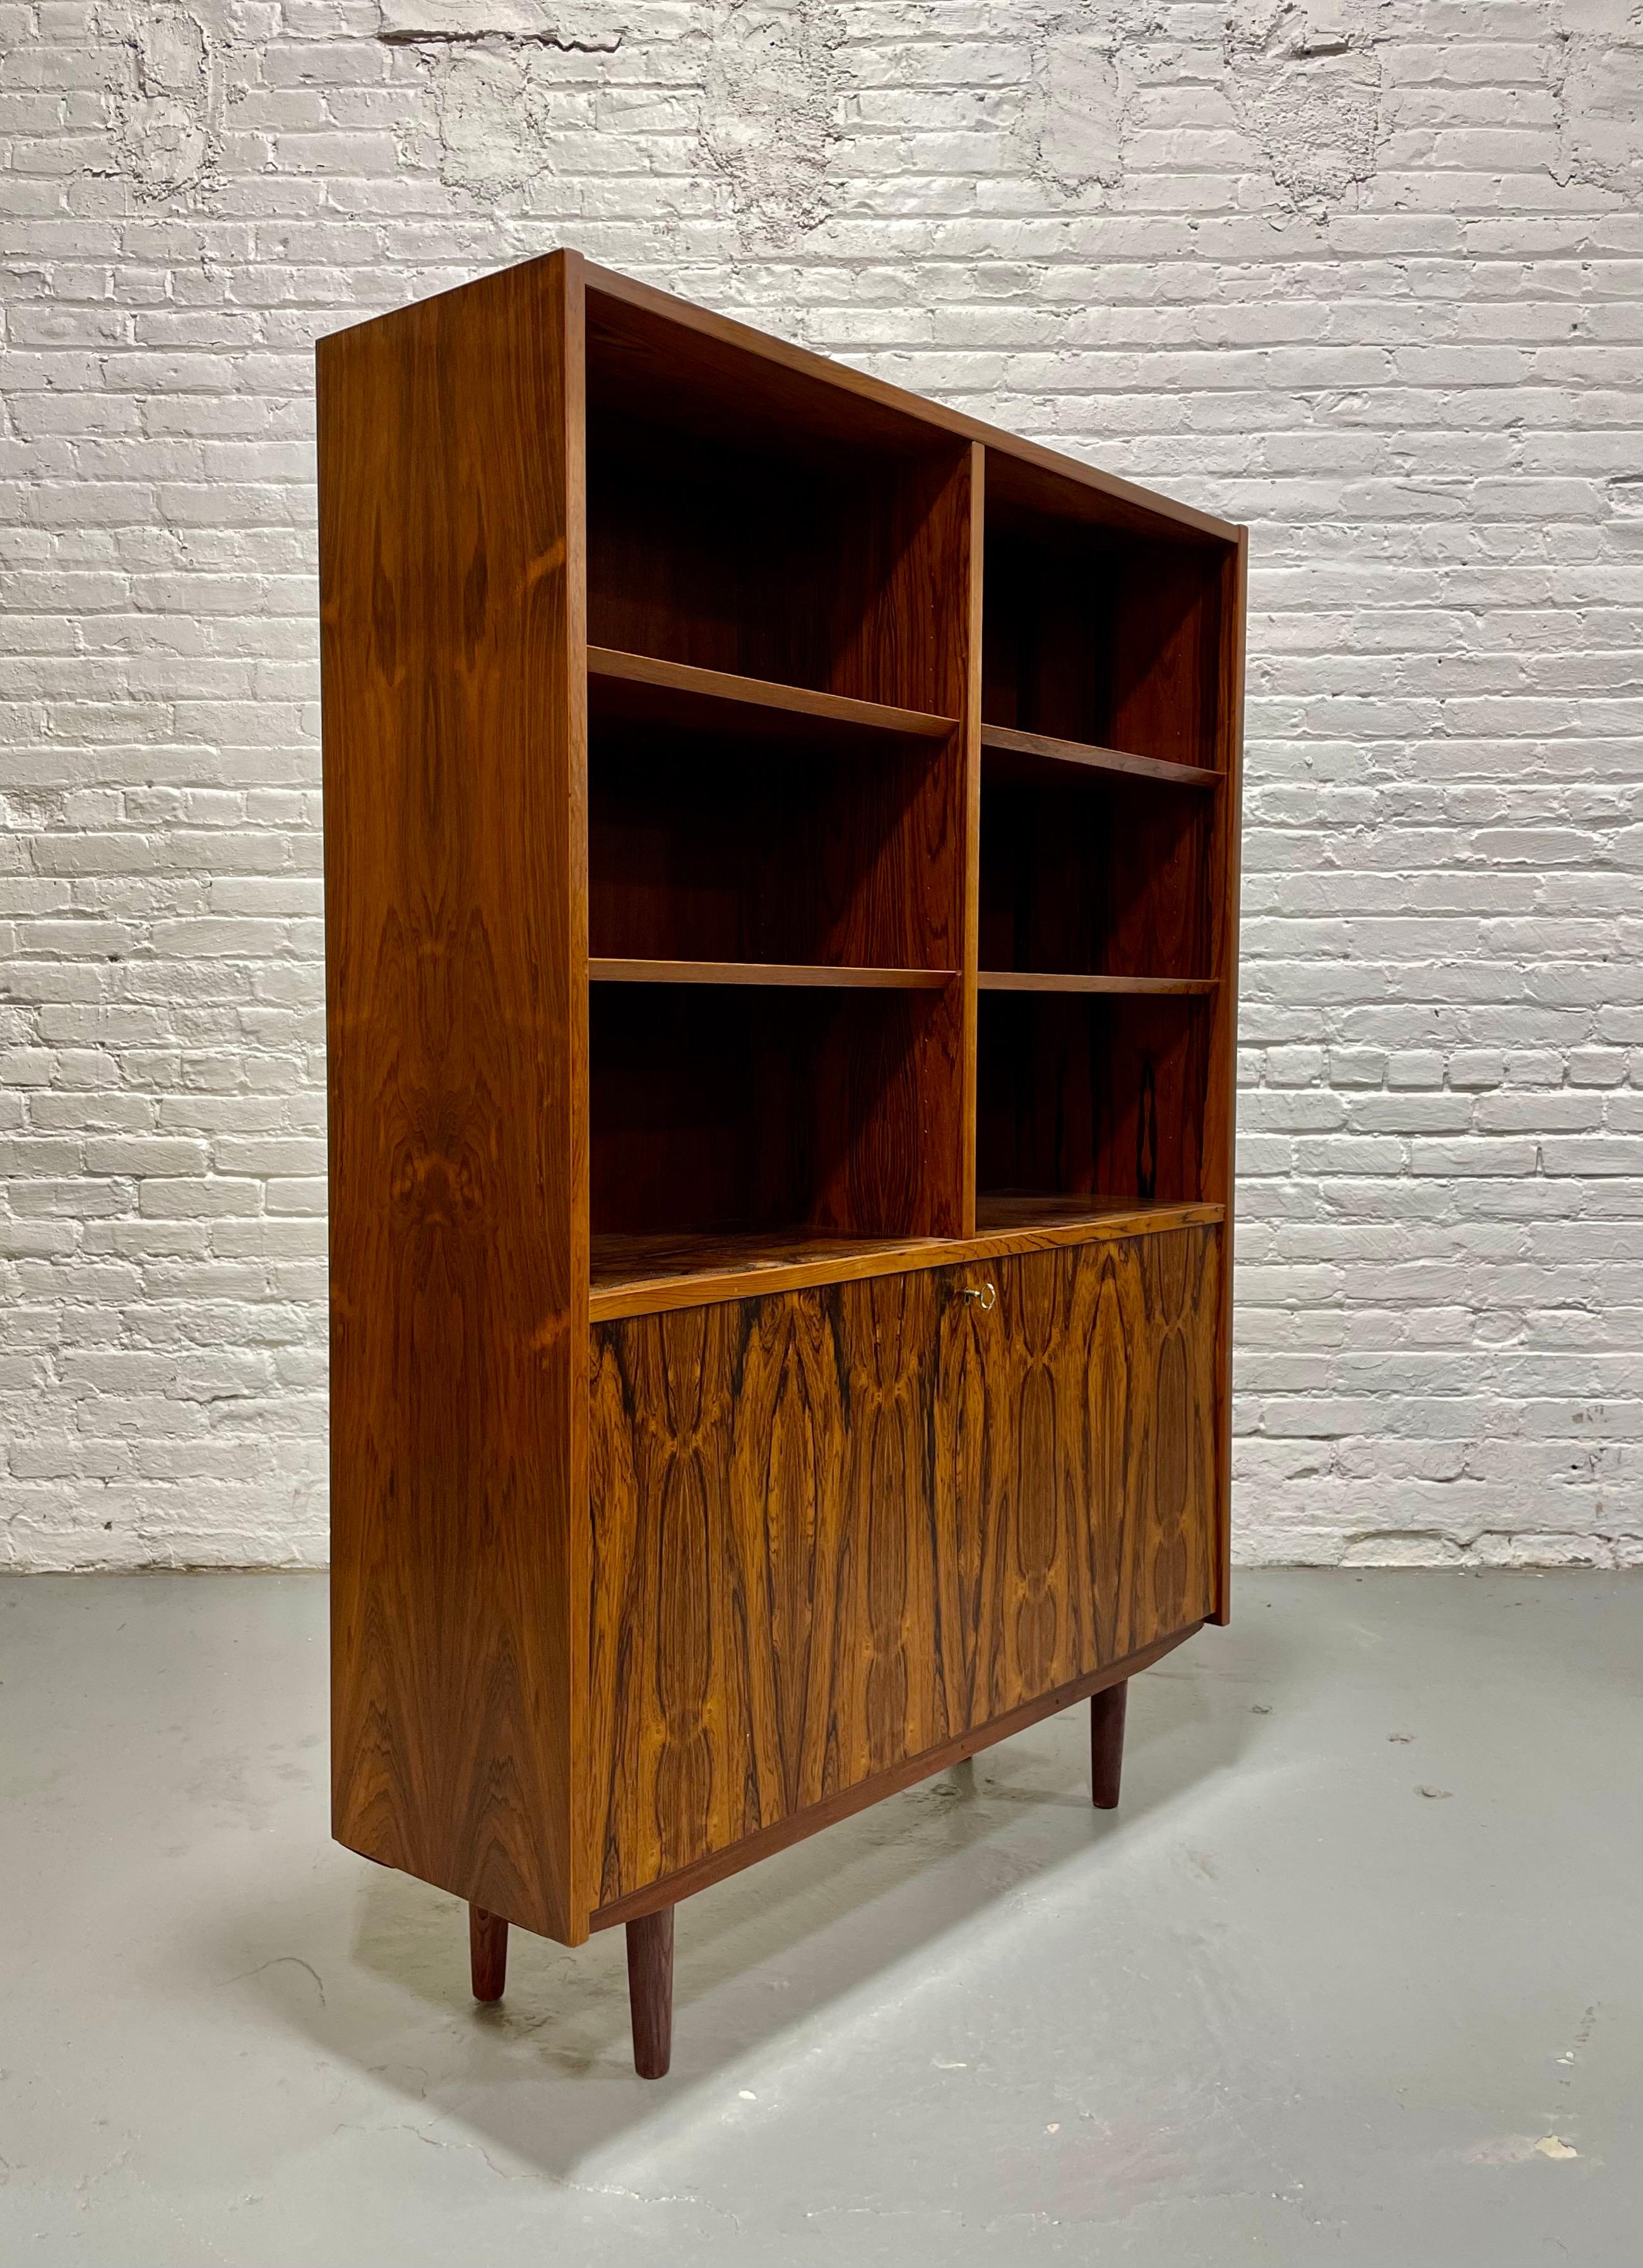 DANISH Mid Century Modern ROSEWOOD BOOKCASE / China Cabinet, c. 1960's For Sale 4